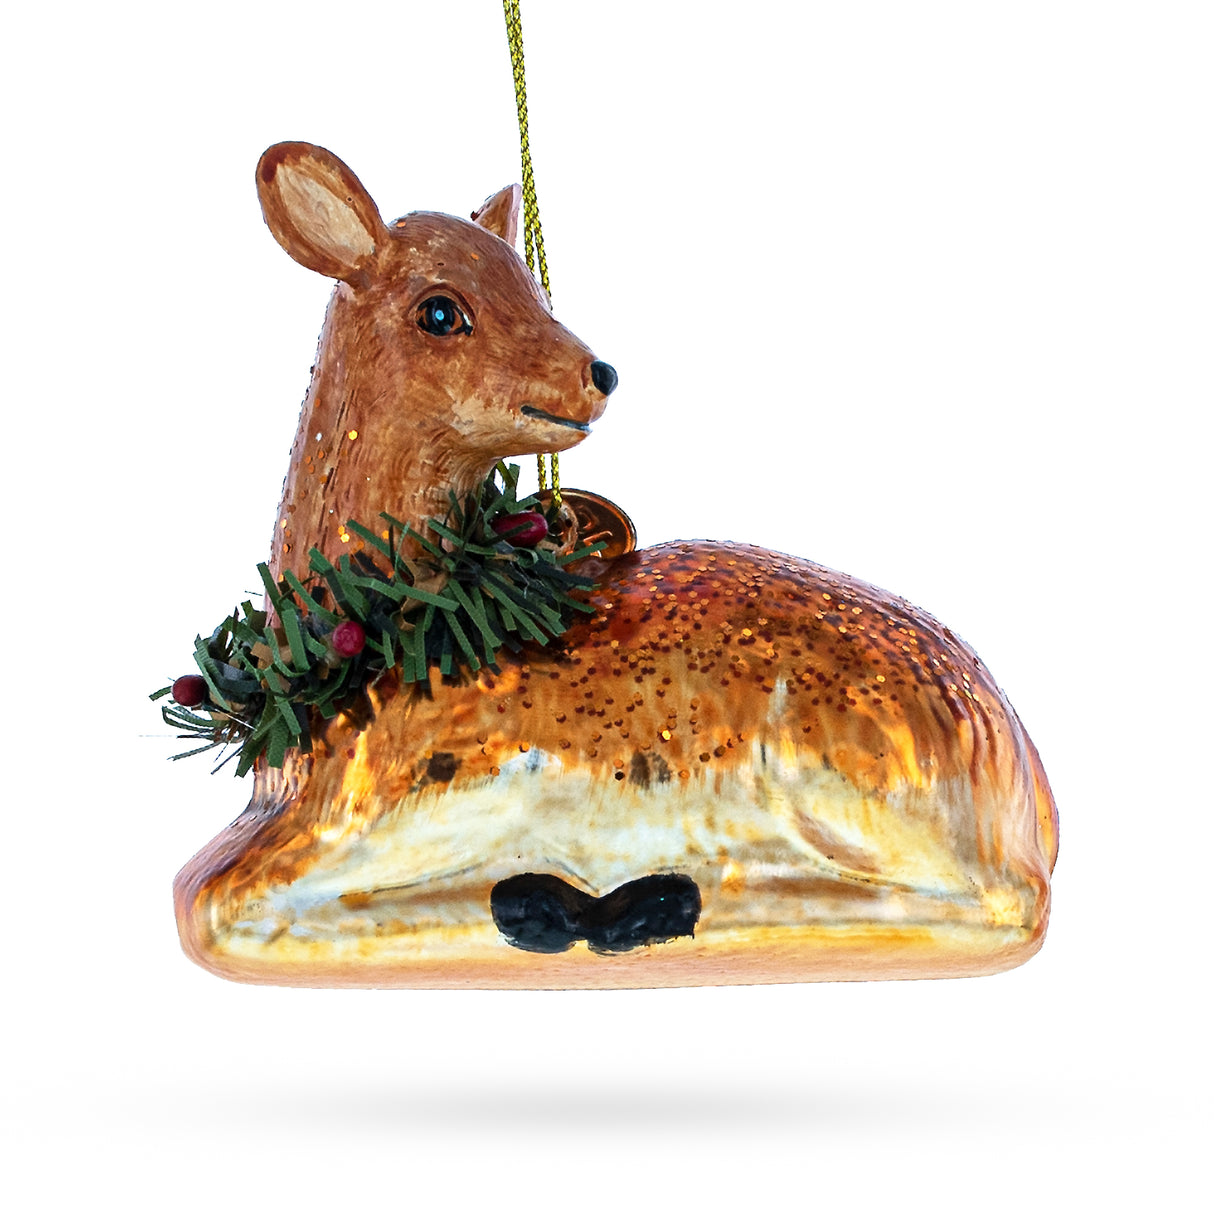 Graceful Deer Adorned with Christmas Wreath - Magnificent Blown Glass Christmas Ornament in Brown color,  shape